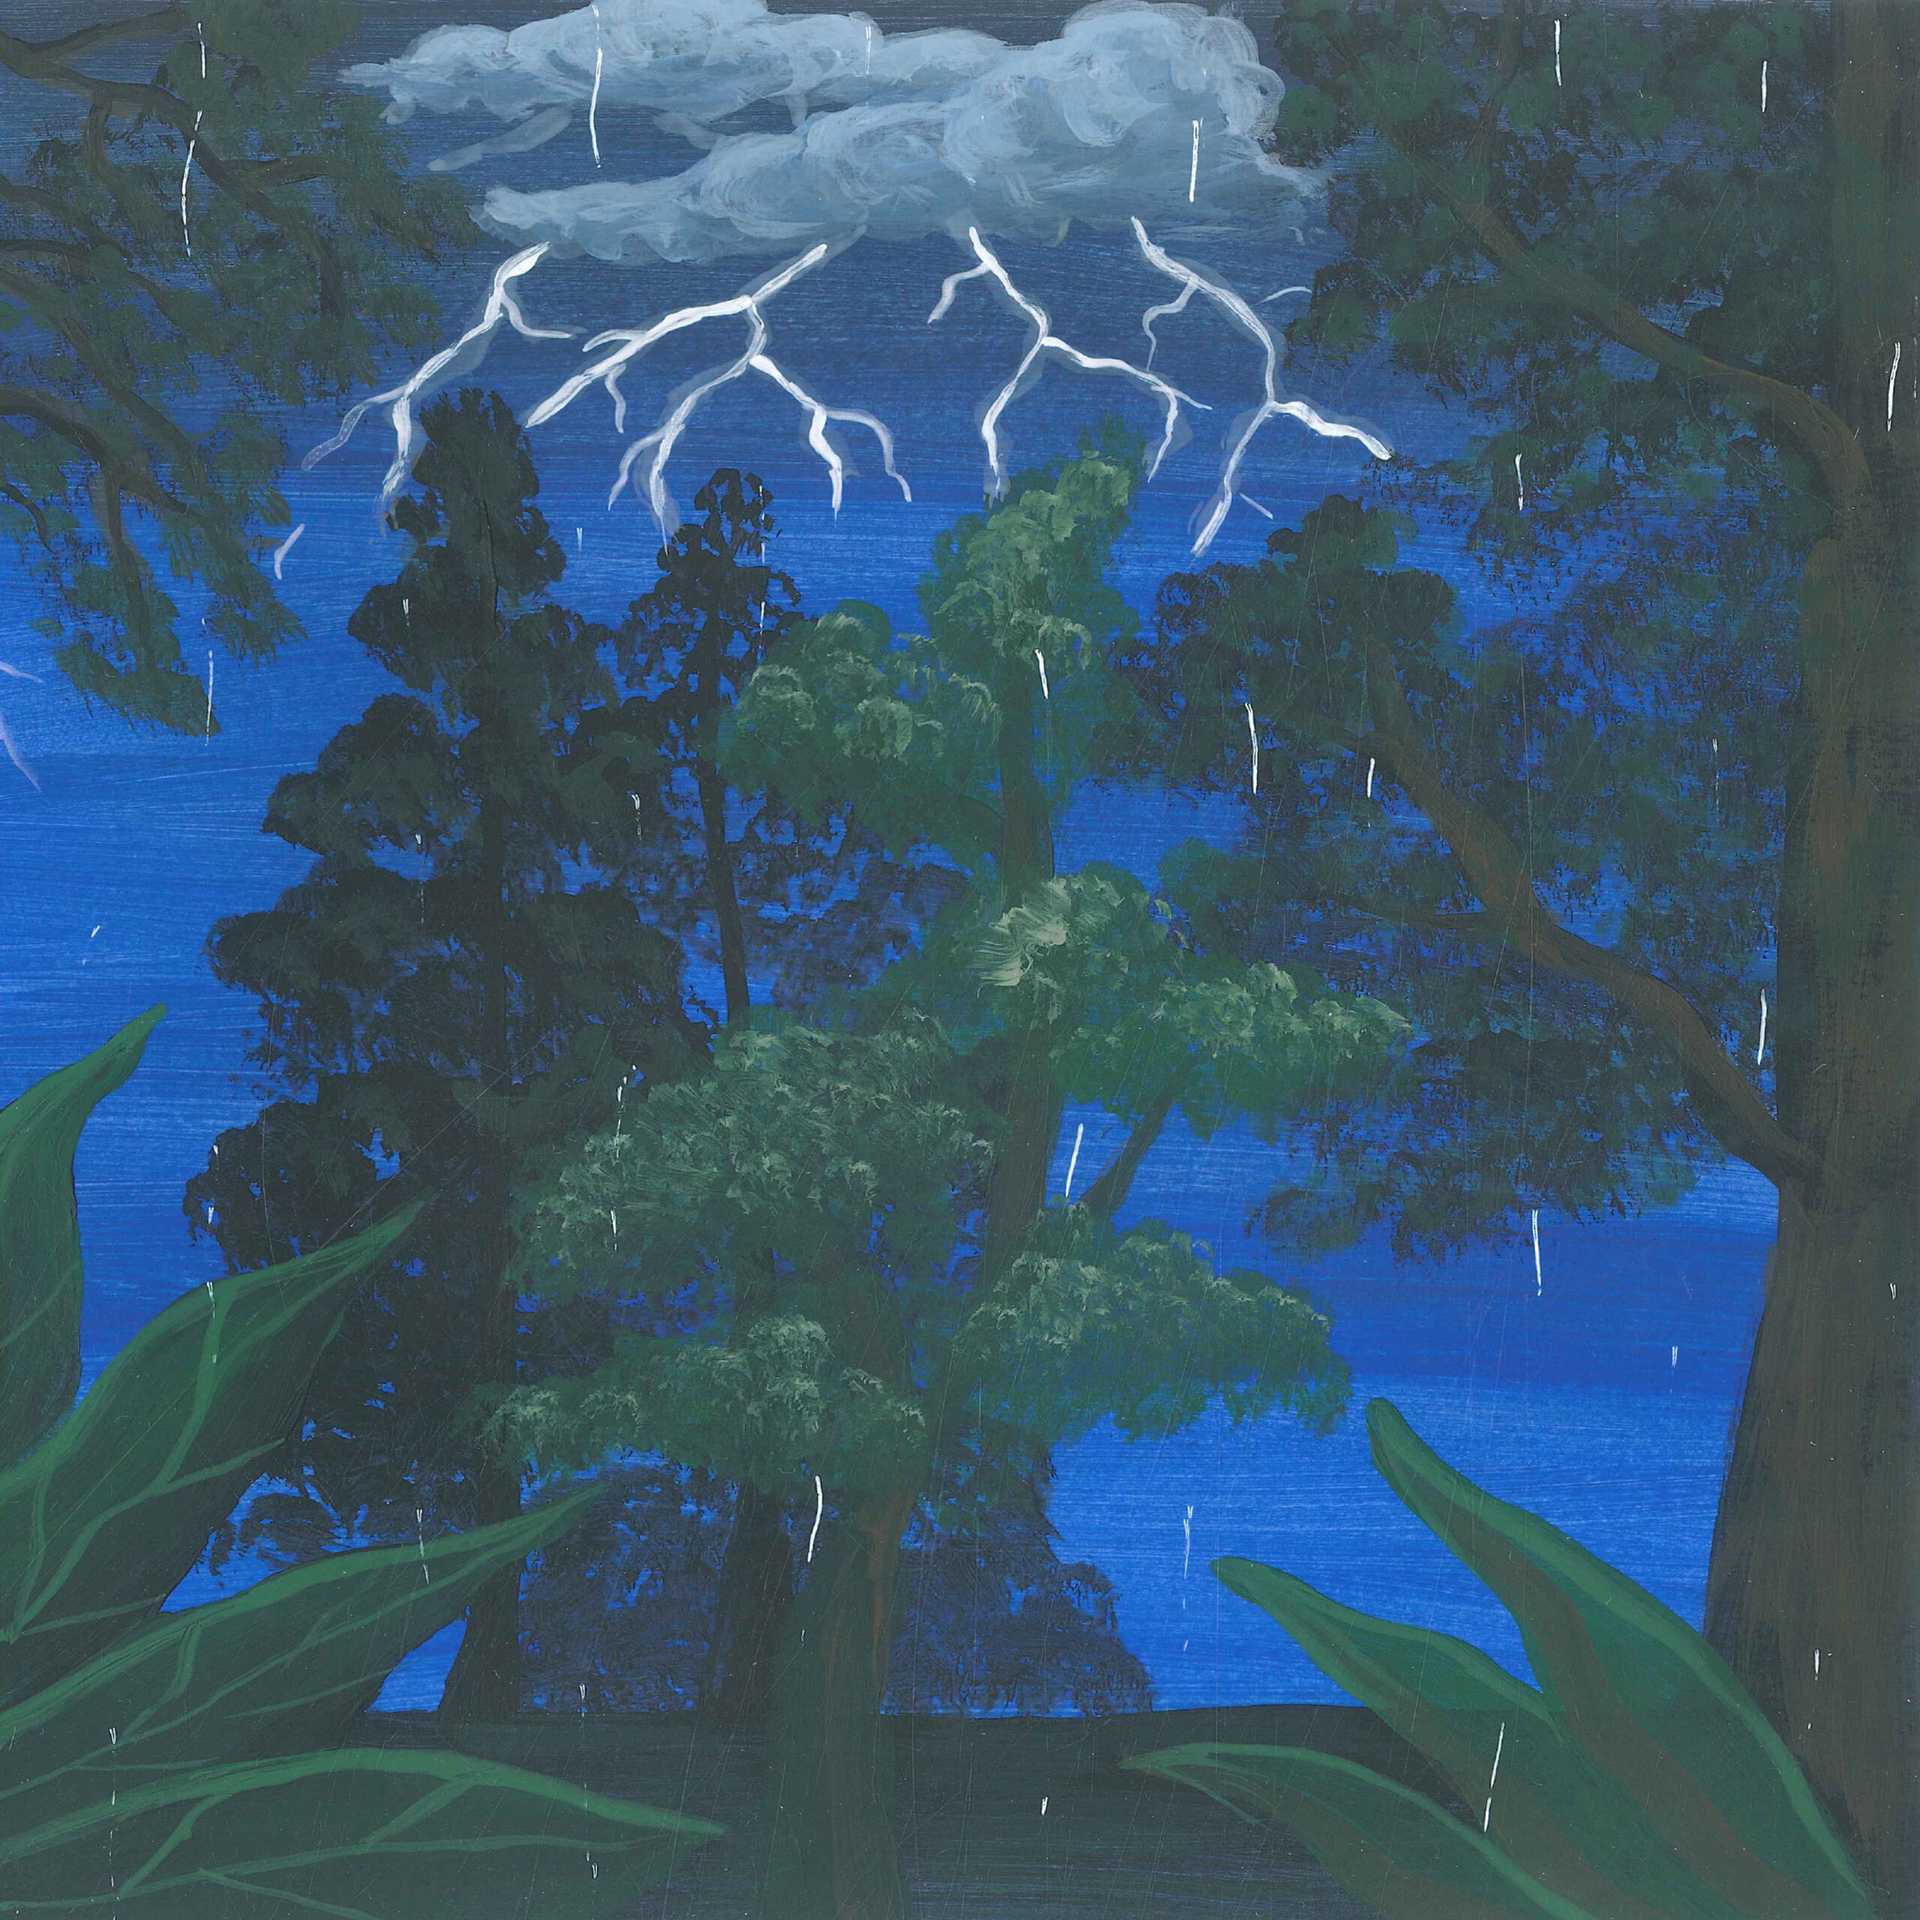 Thunderstorm and high winds - nature landscape painting - earth.fm